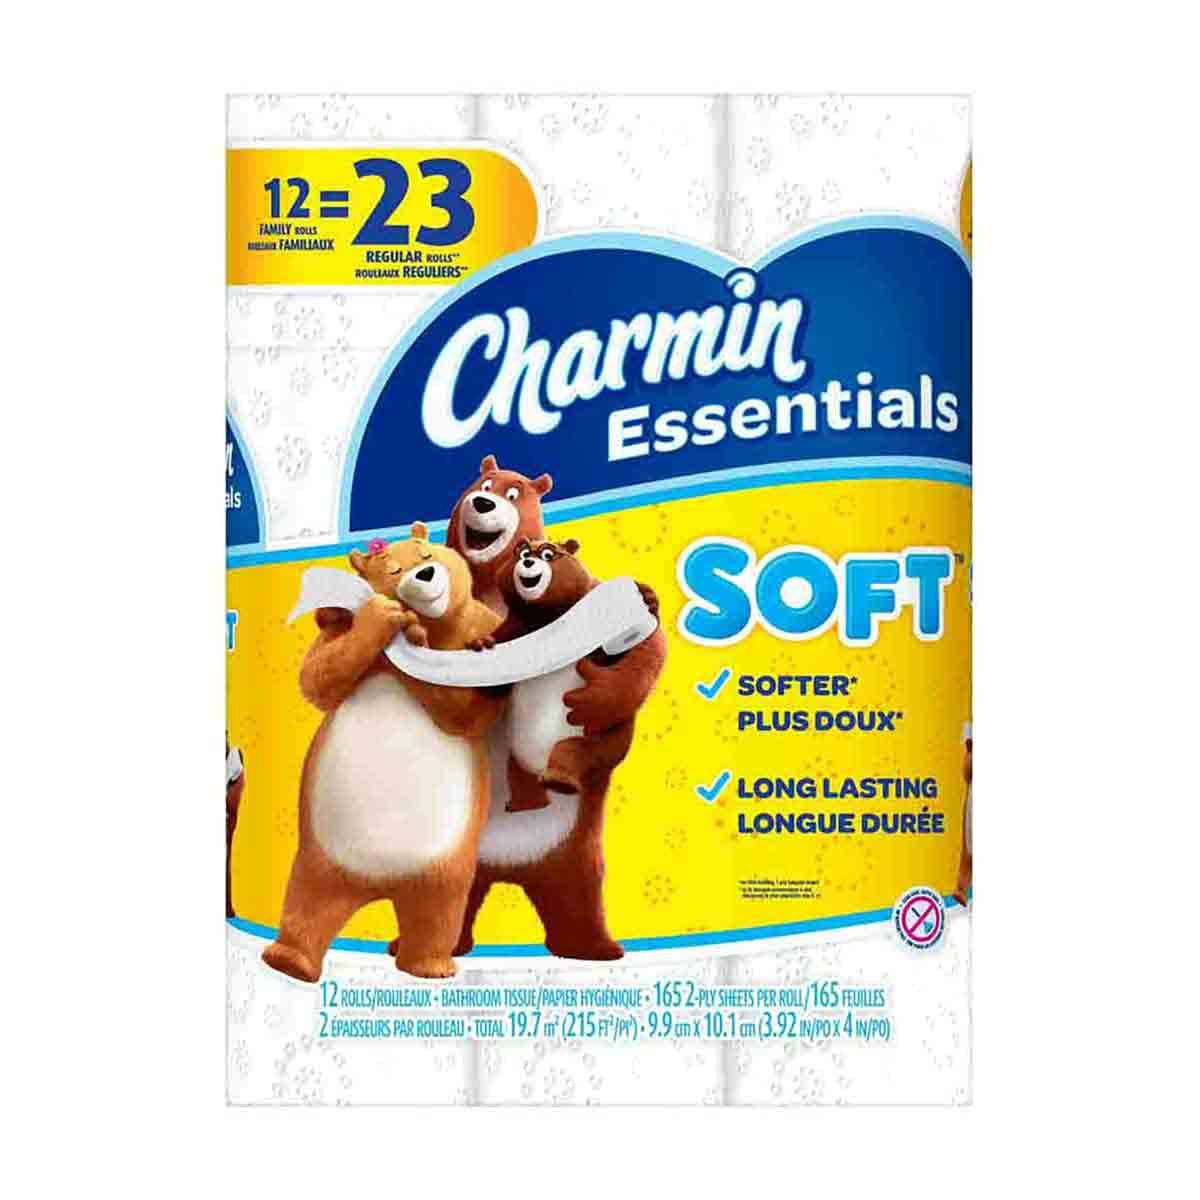 Charmin Essentials Soft Toilet Paper 12 Family Rolls on Sale At Dollar General